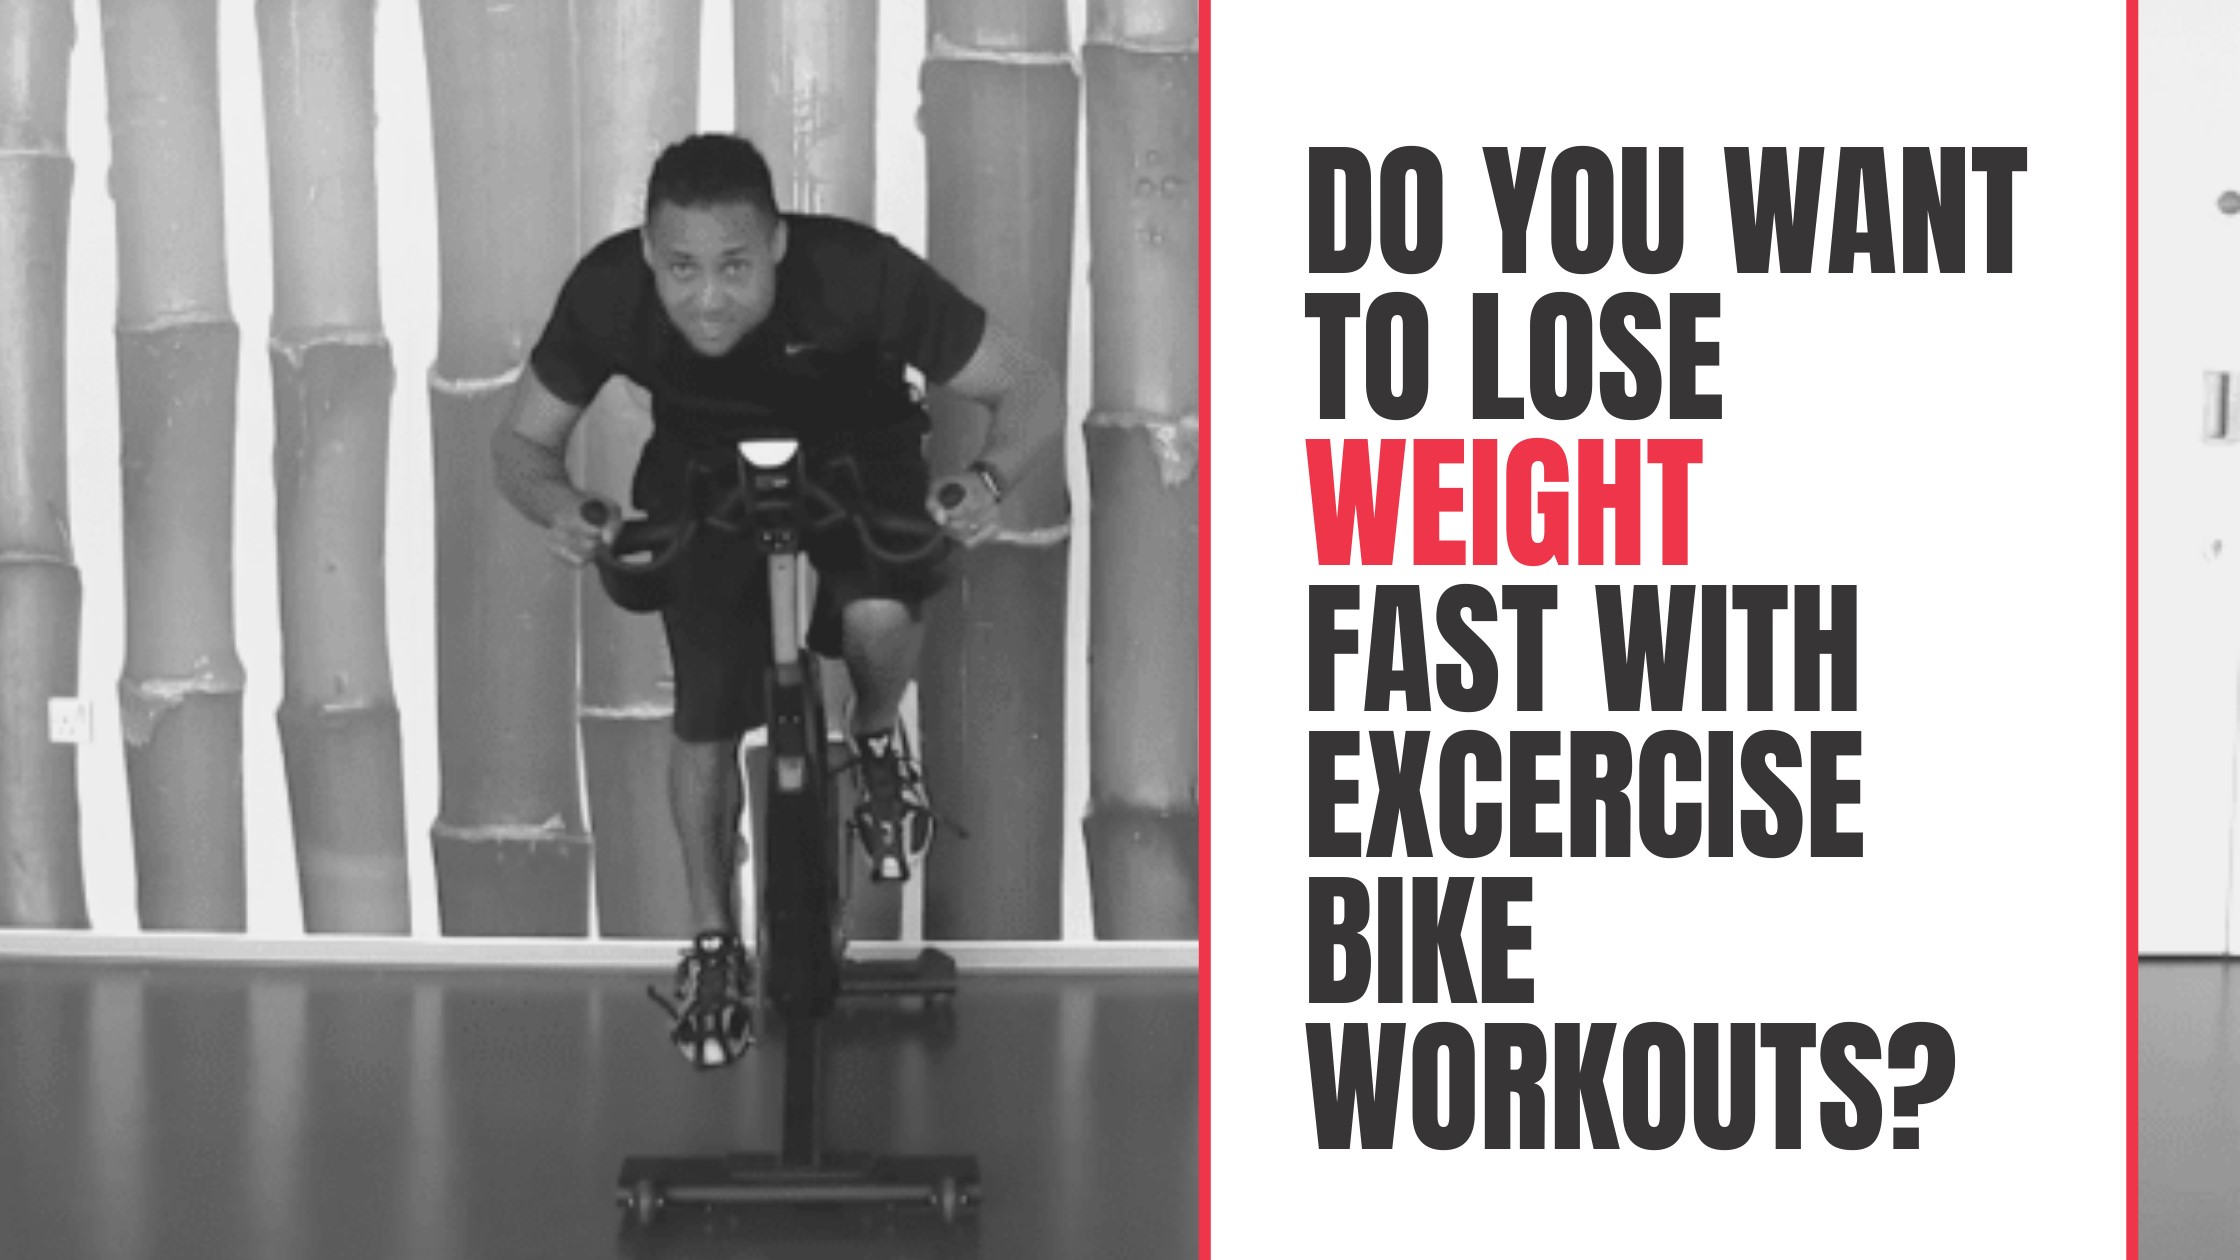 Do You Want To Lose Weight Fast With Exercise Bike Workouts?